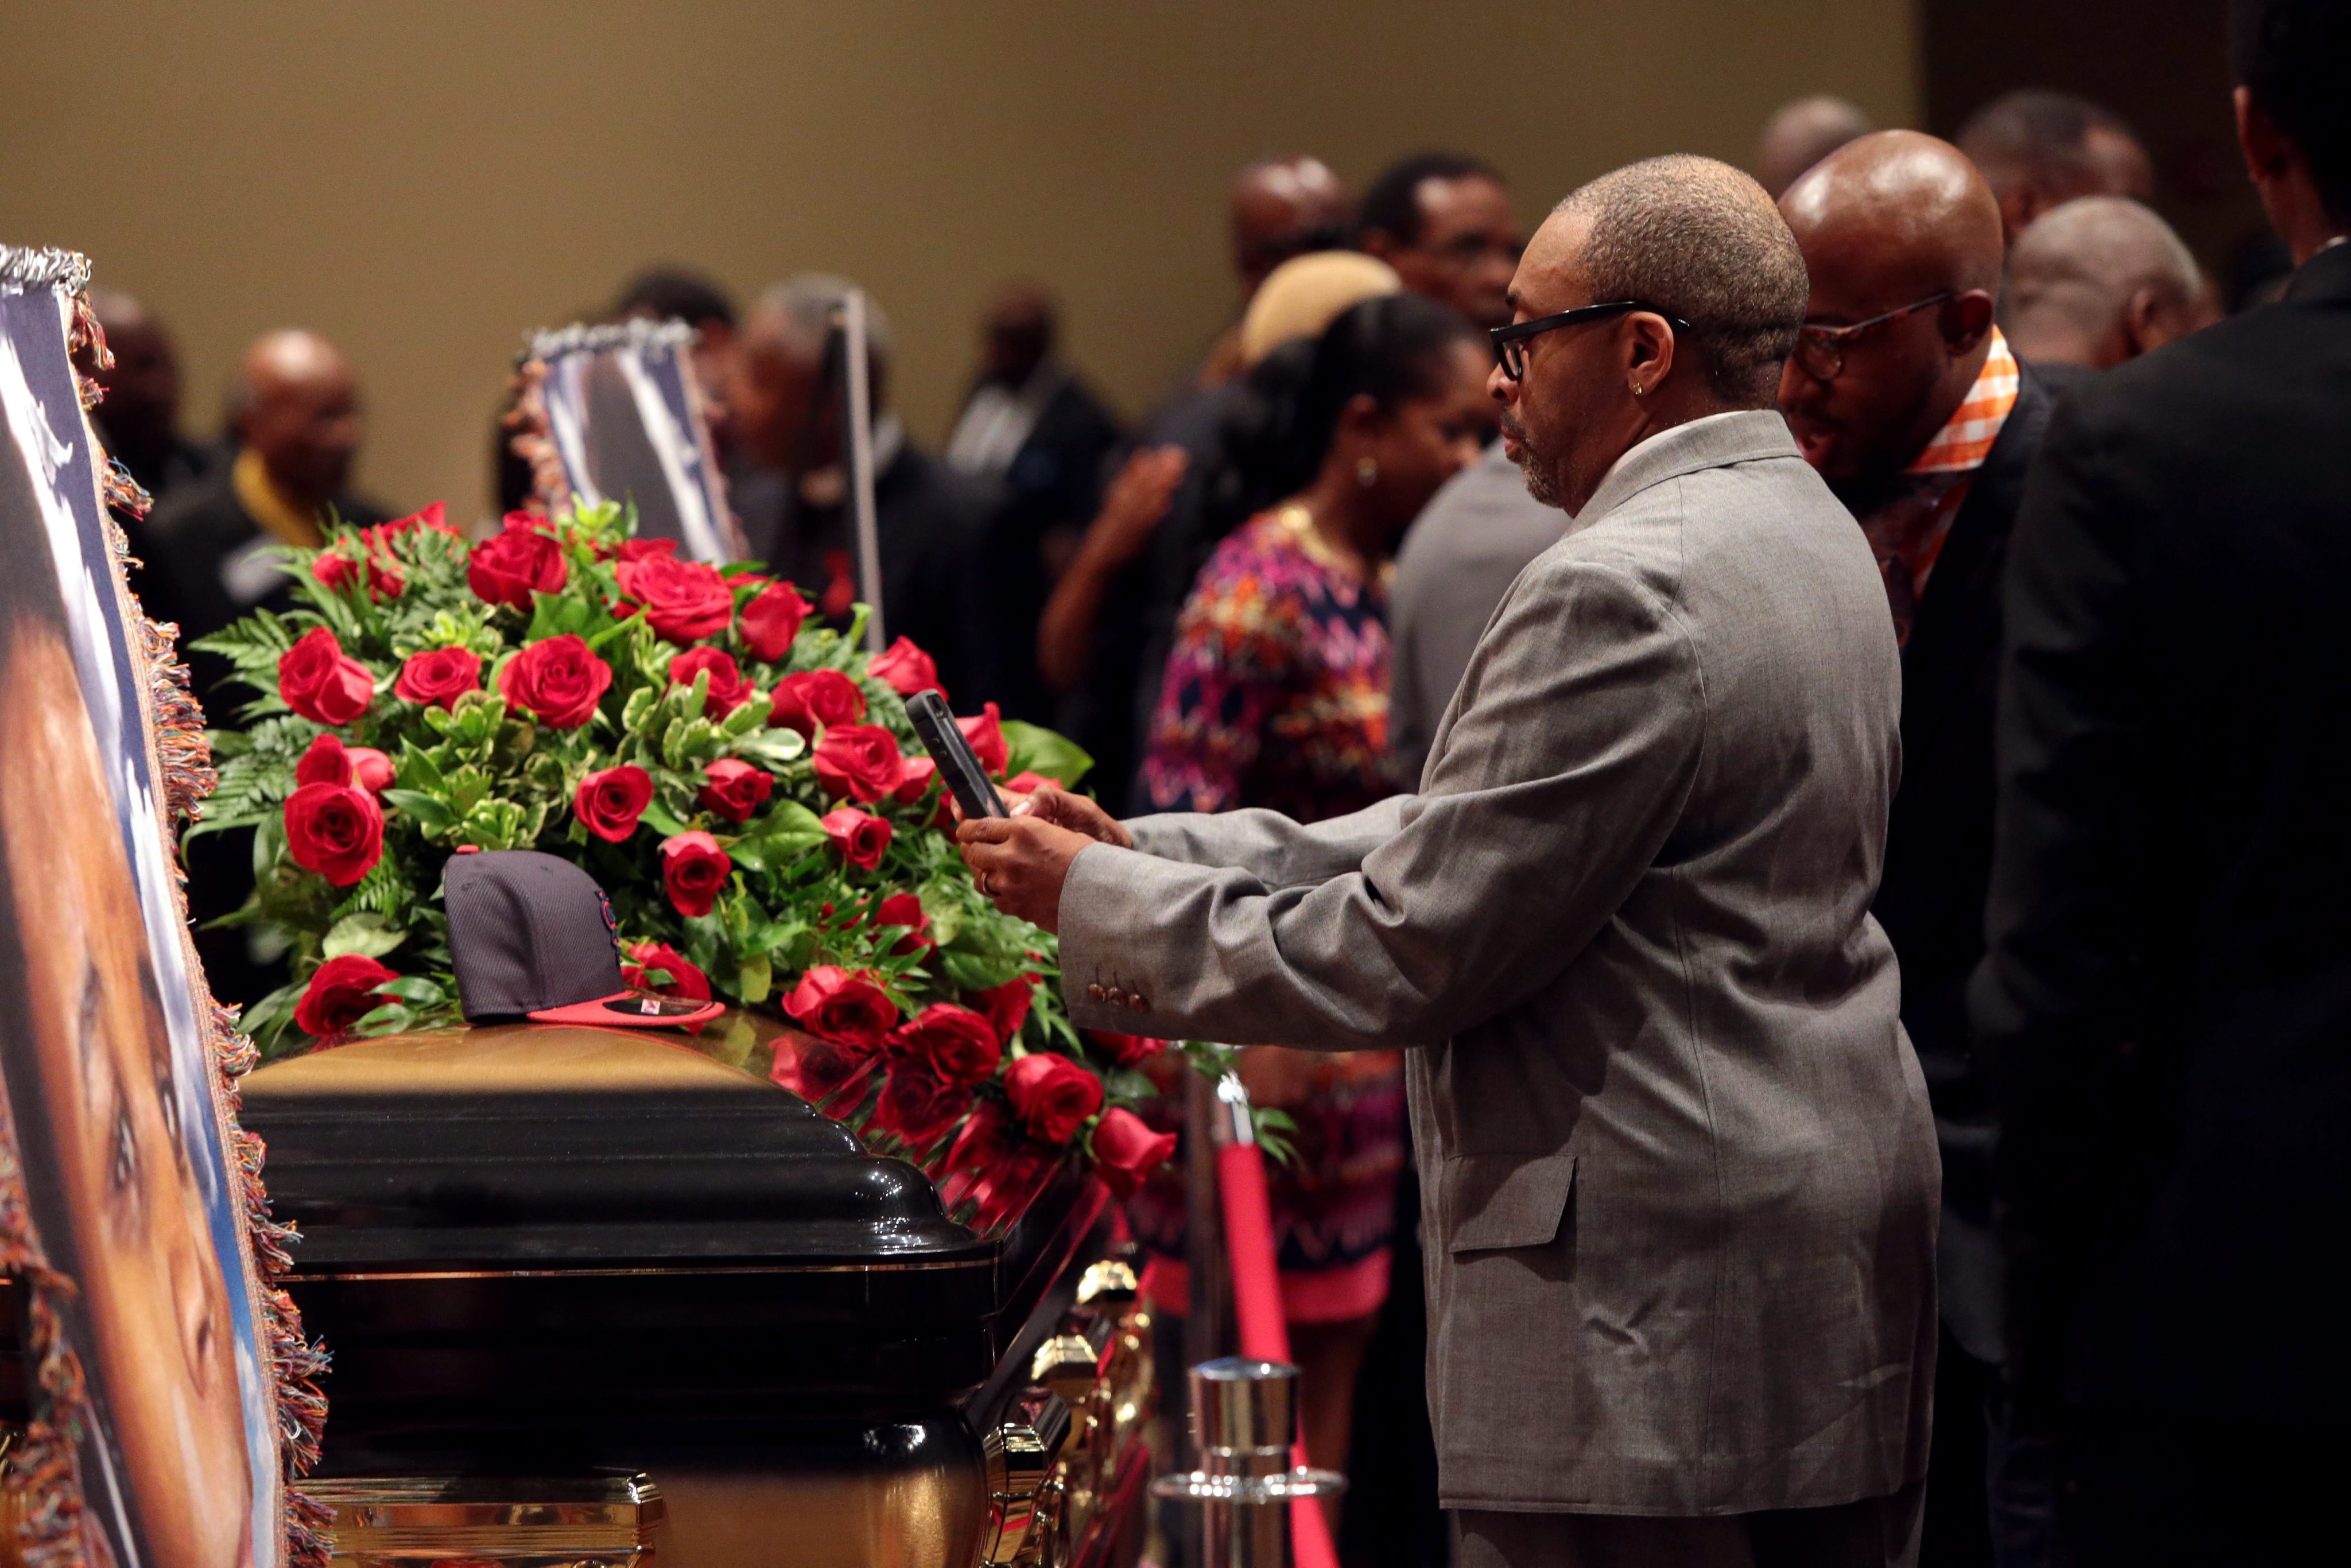 American film director Spike Lee takes a picture of a black St. Louis Cardinals baseball cap on top of Michael Brown's casket during his funeral inside the Friendly Temple Missionary Baptist Church in St. Louis on Aug. 25, 2014.